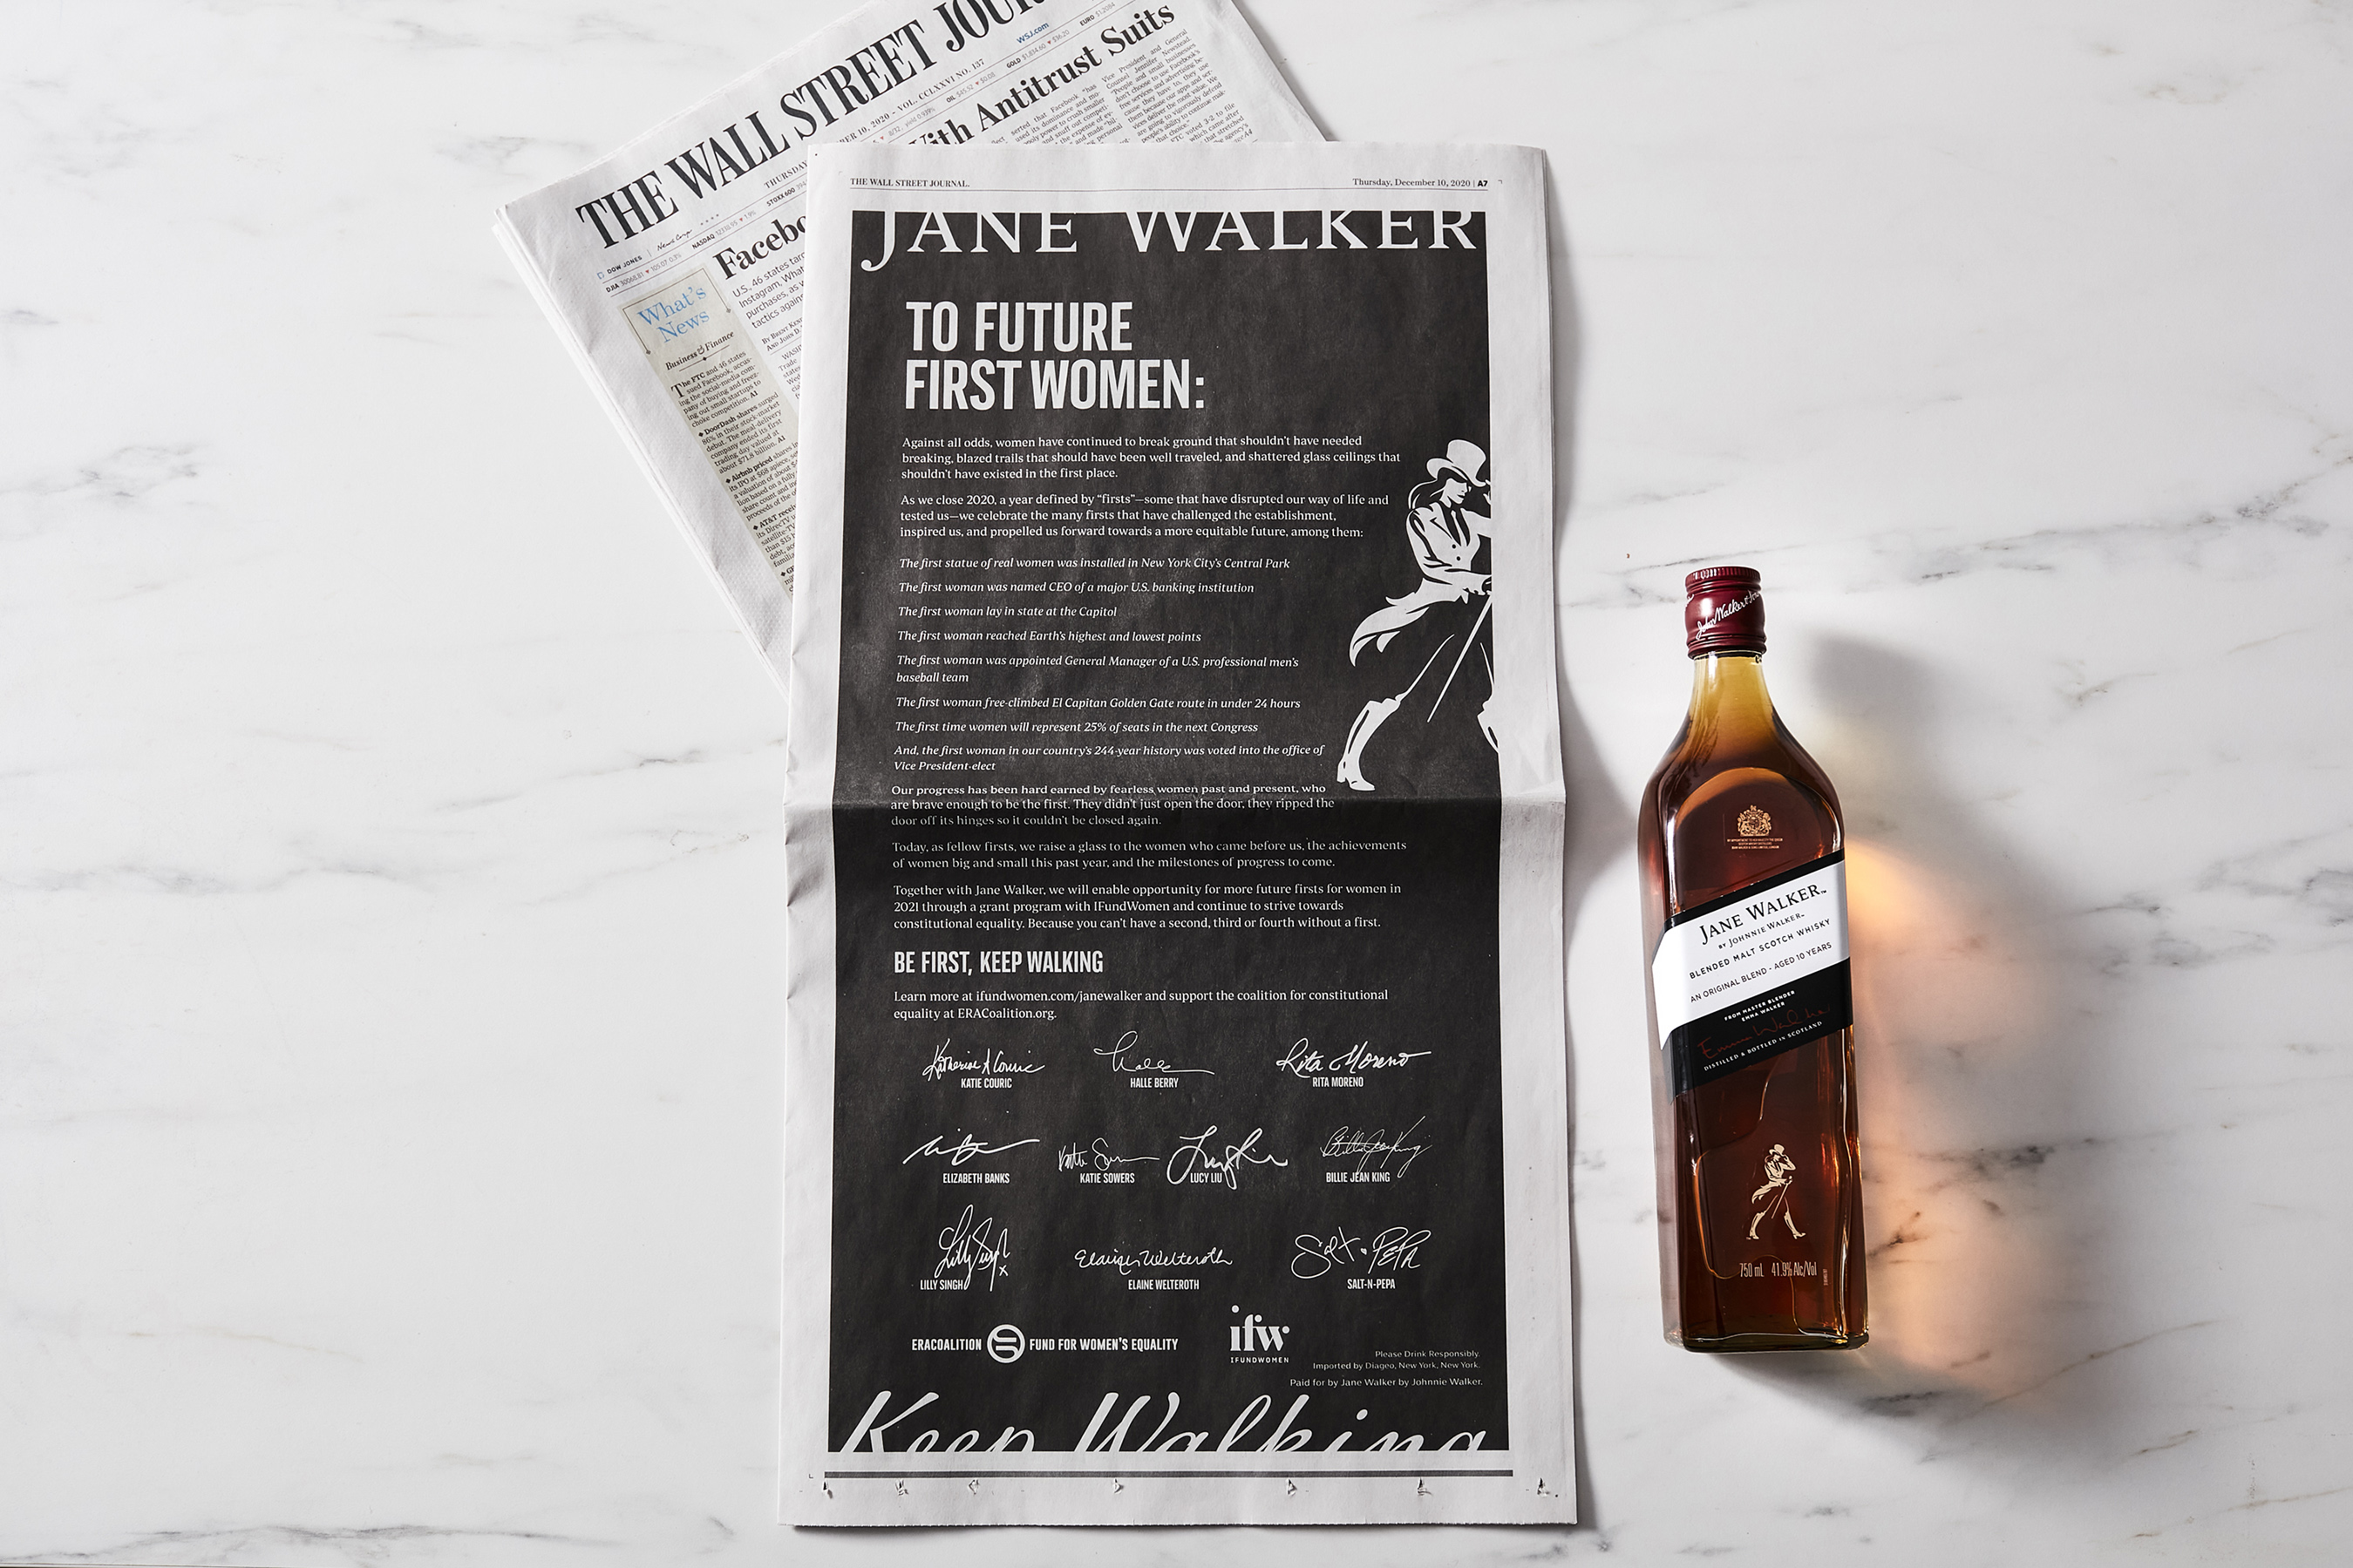 Jane Walker by Johnnie Walker launches its First Women campaign with an Open Letter in The New York Times, The Wall Street Journal and The Washington Post signed by a network of trailblazing 'First Women.'